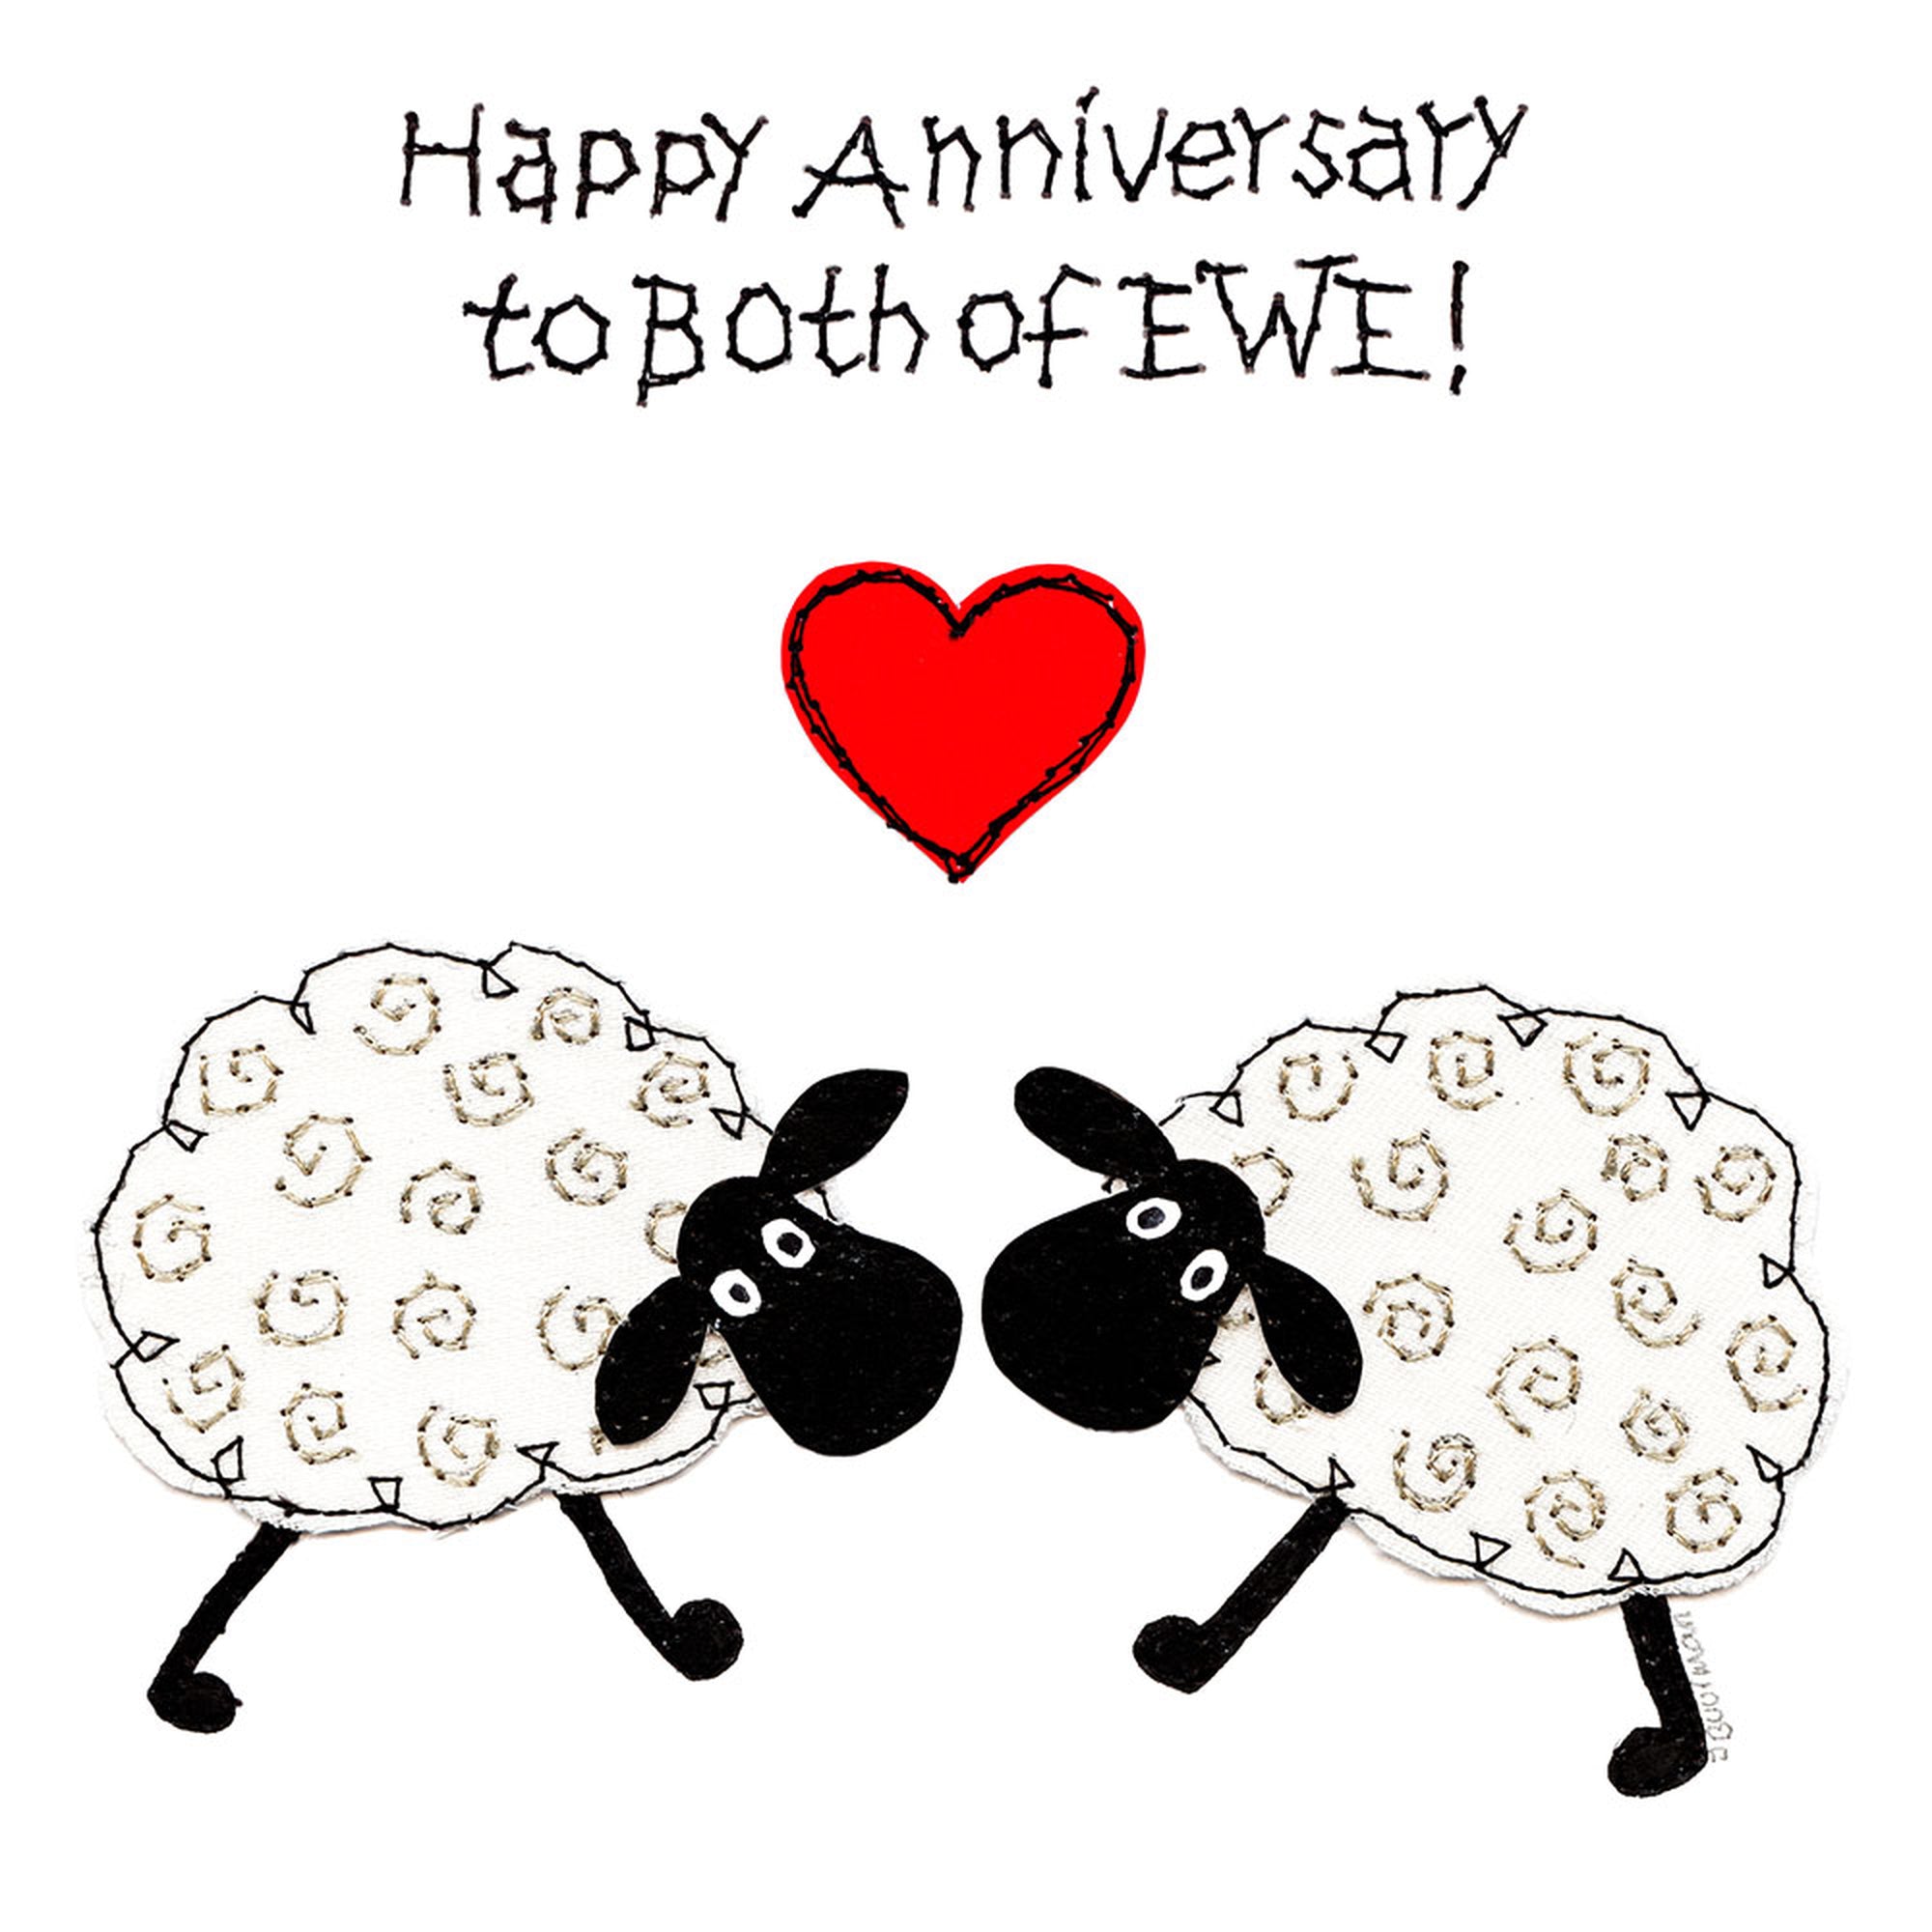 Both Of Ewe Anniversary Card from Penny Black